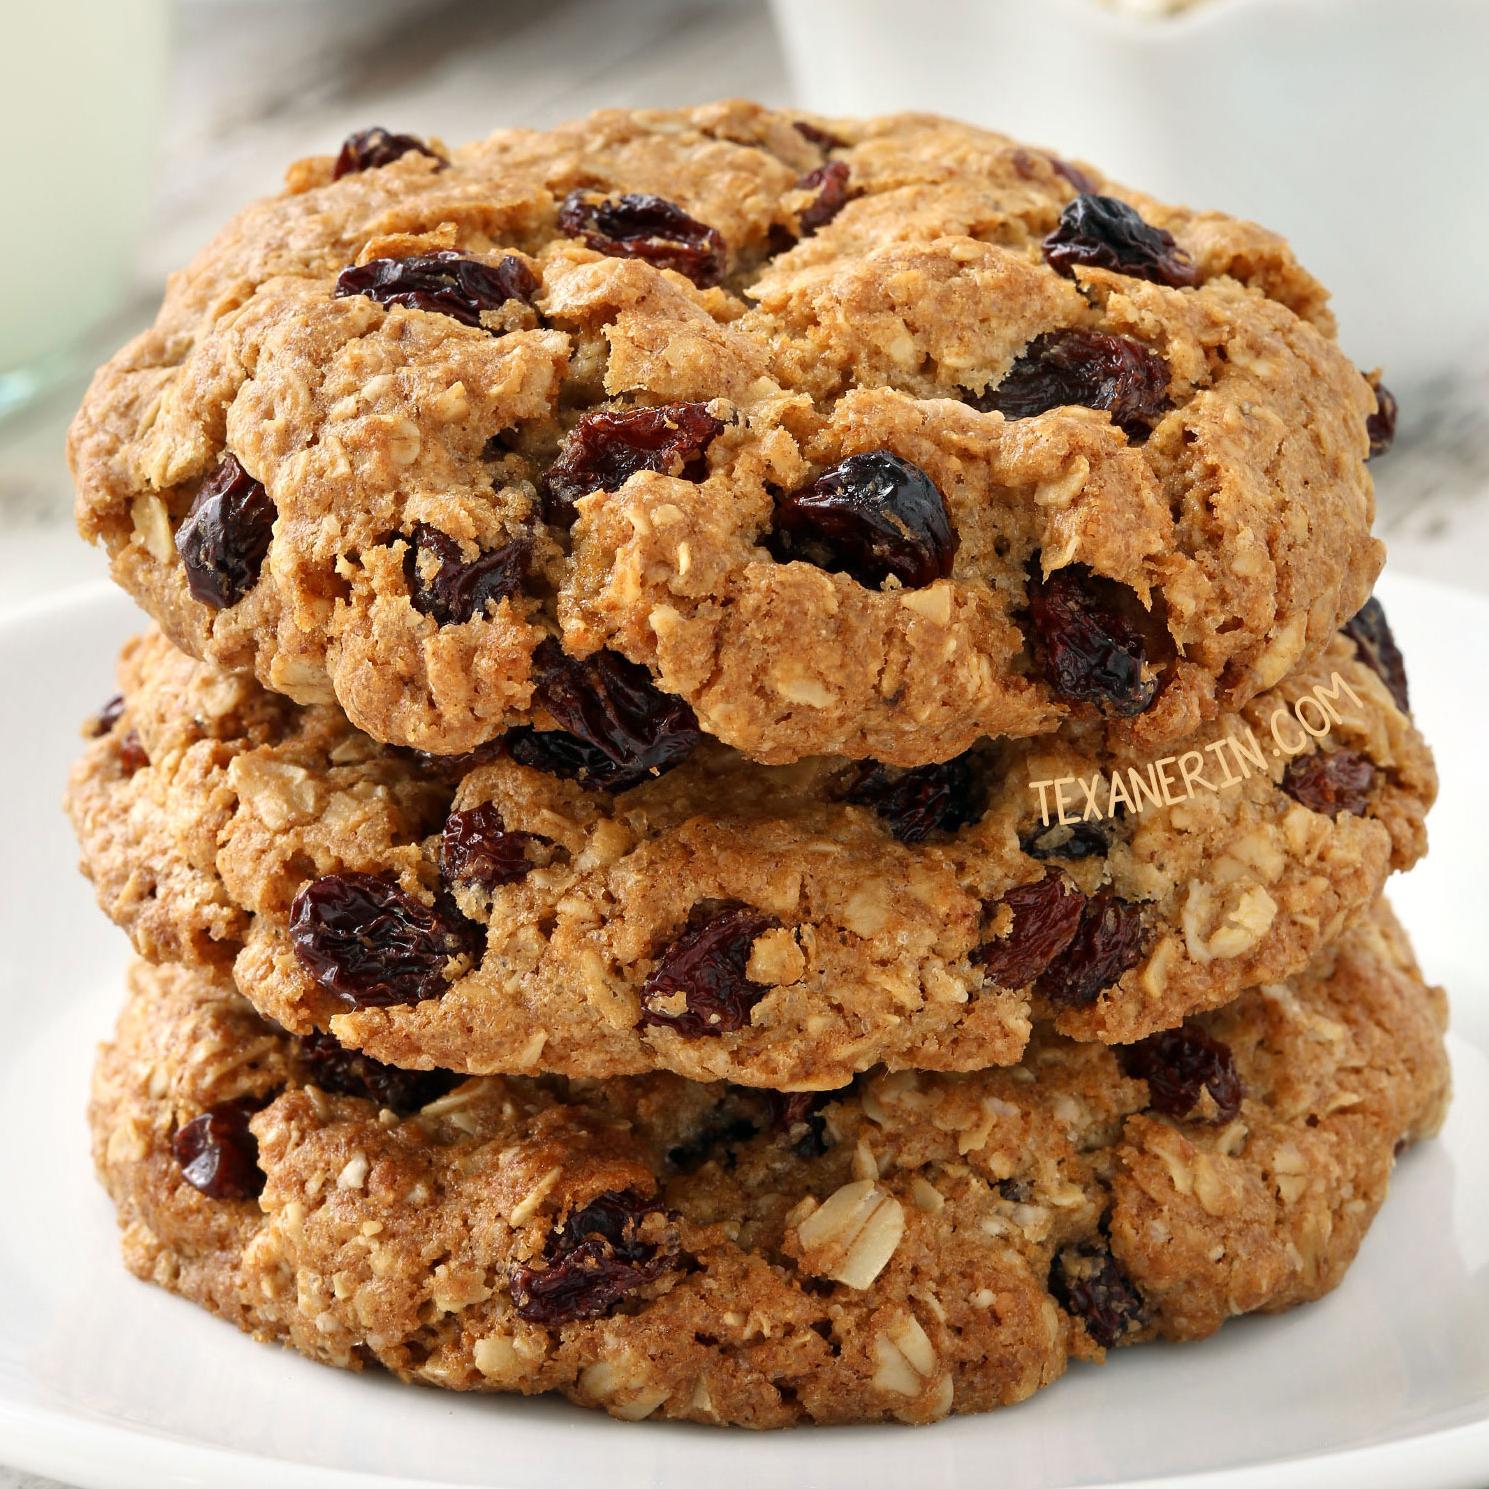  Satisfy your cravings with these delicious gluten-free cookies.